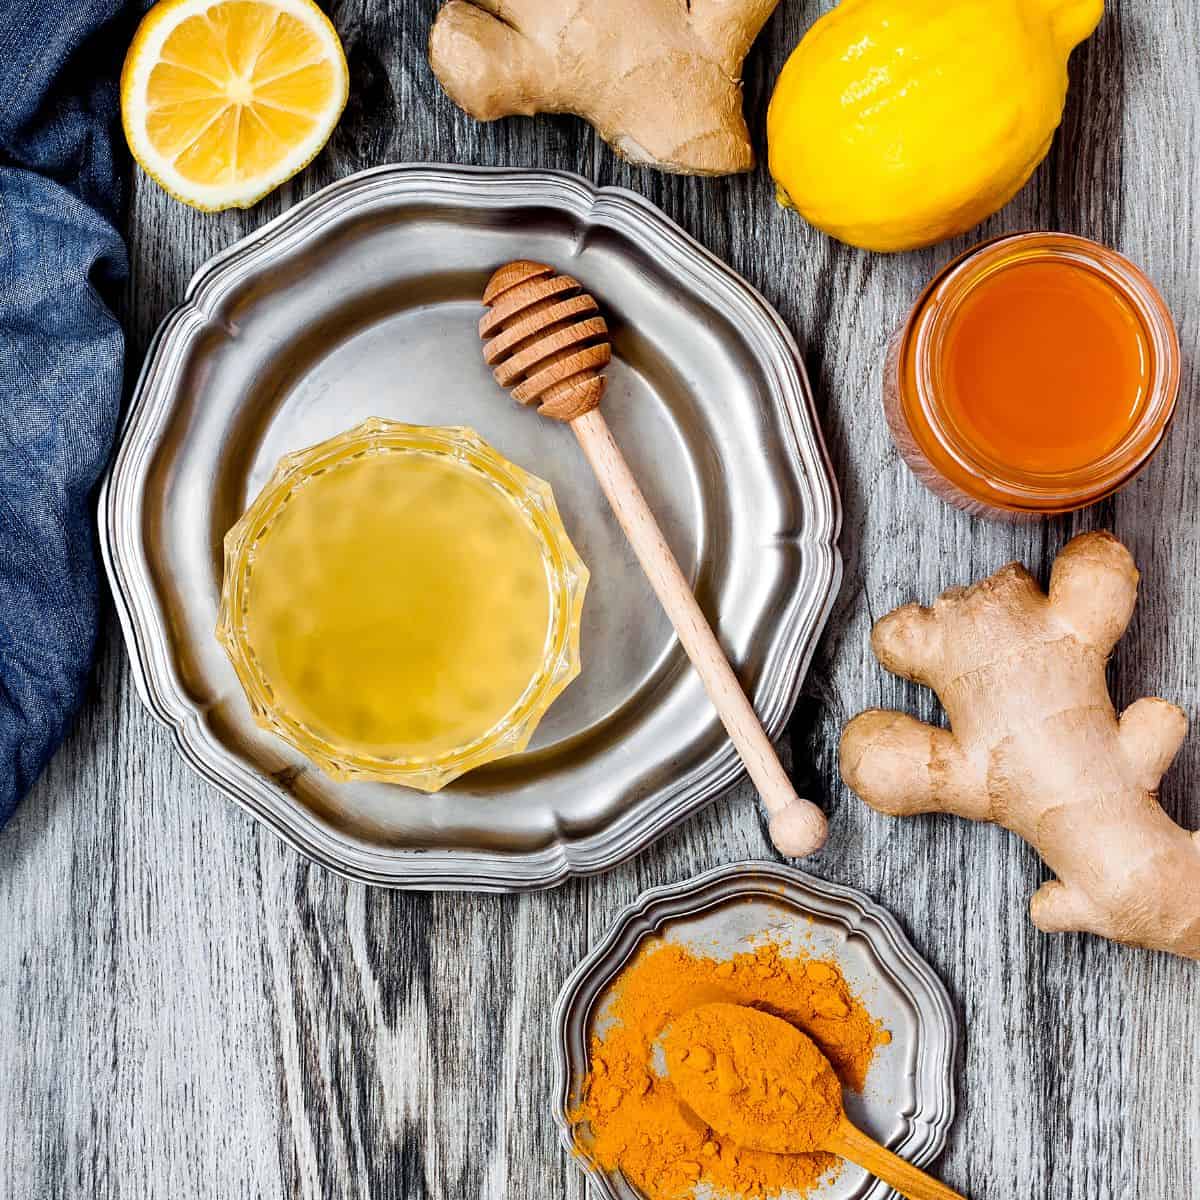 distressed wood with decorative silver platters with turmeric powder in a wooden spoon, lemon juice in a glass bowl, cut lemons, ginger, and a pot of honey and honeycomb stick. with a jean fabric in the side frame